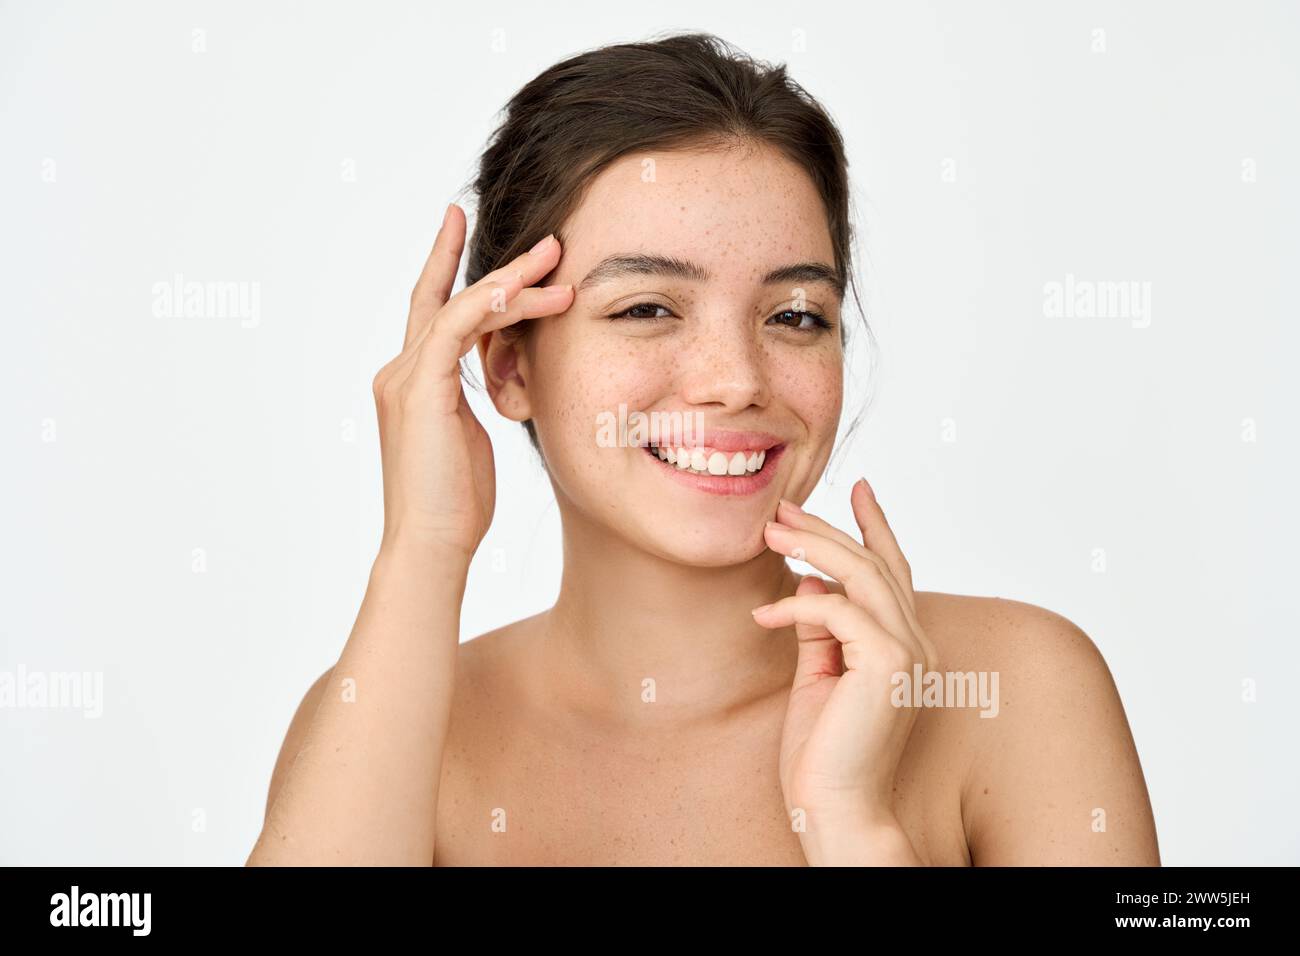 Beauty portrait of happy Latin girl advertising cosmetic for skin care. Stock Photo